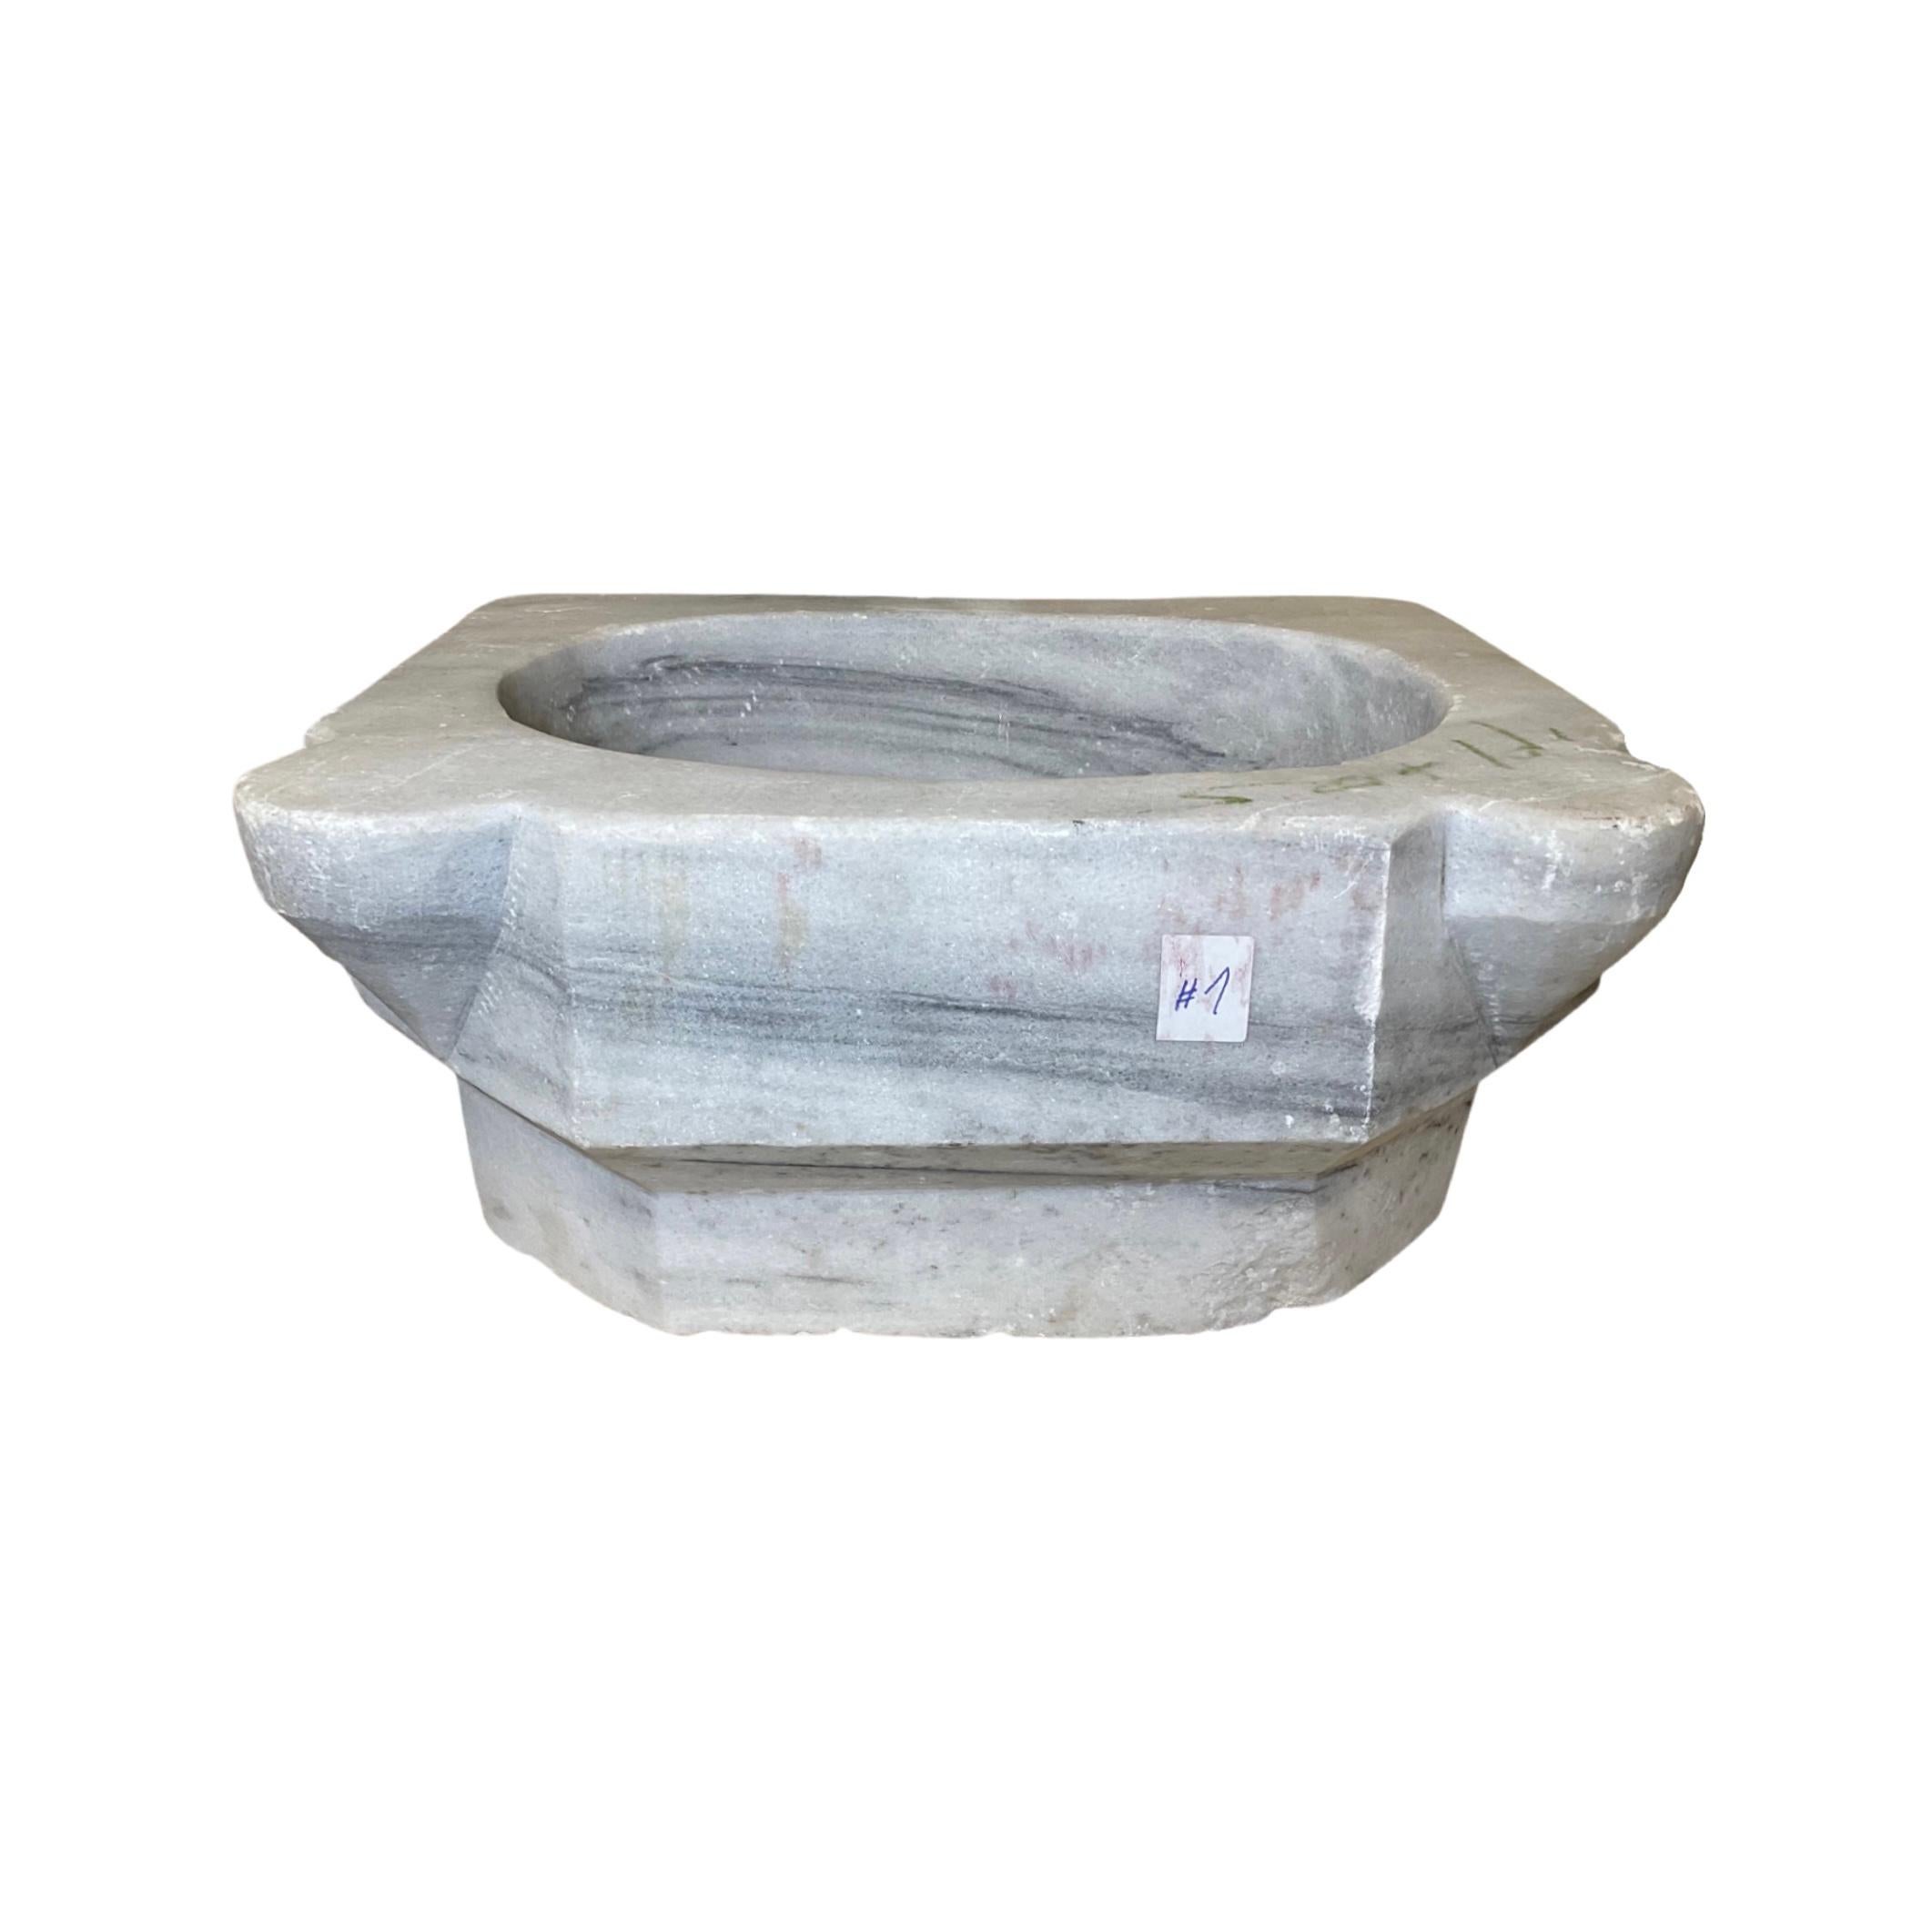 This classic French white marble sink is a unique piece of craftsmanship dating back to the 1850s. With a luxurious and timeless design, this sink will be a stunning feature in any bathroom. It is made of durable marble and features a glossy,